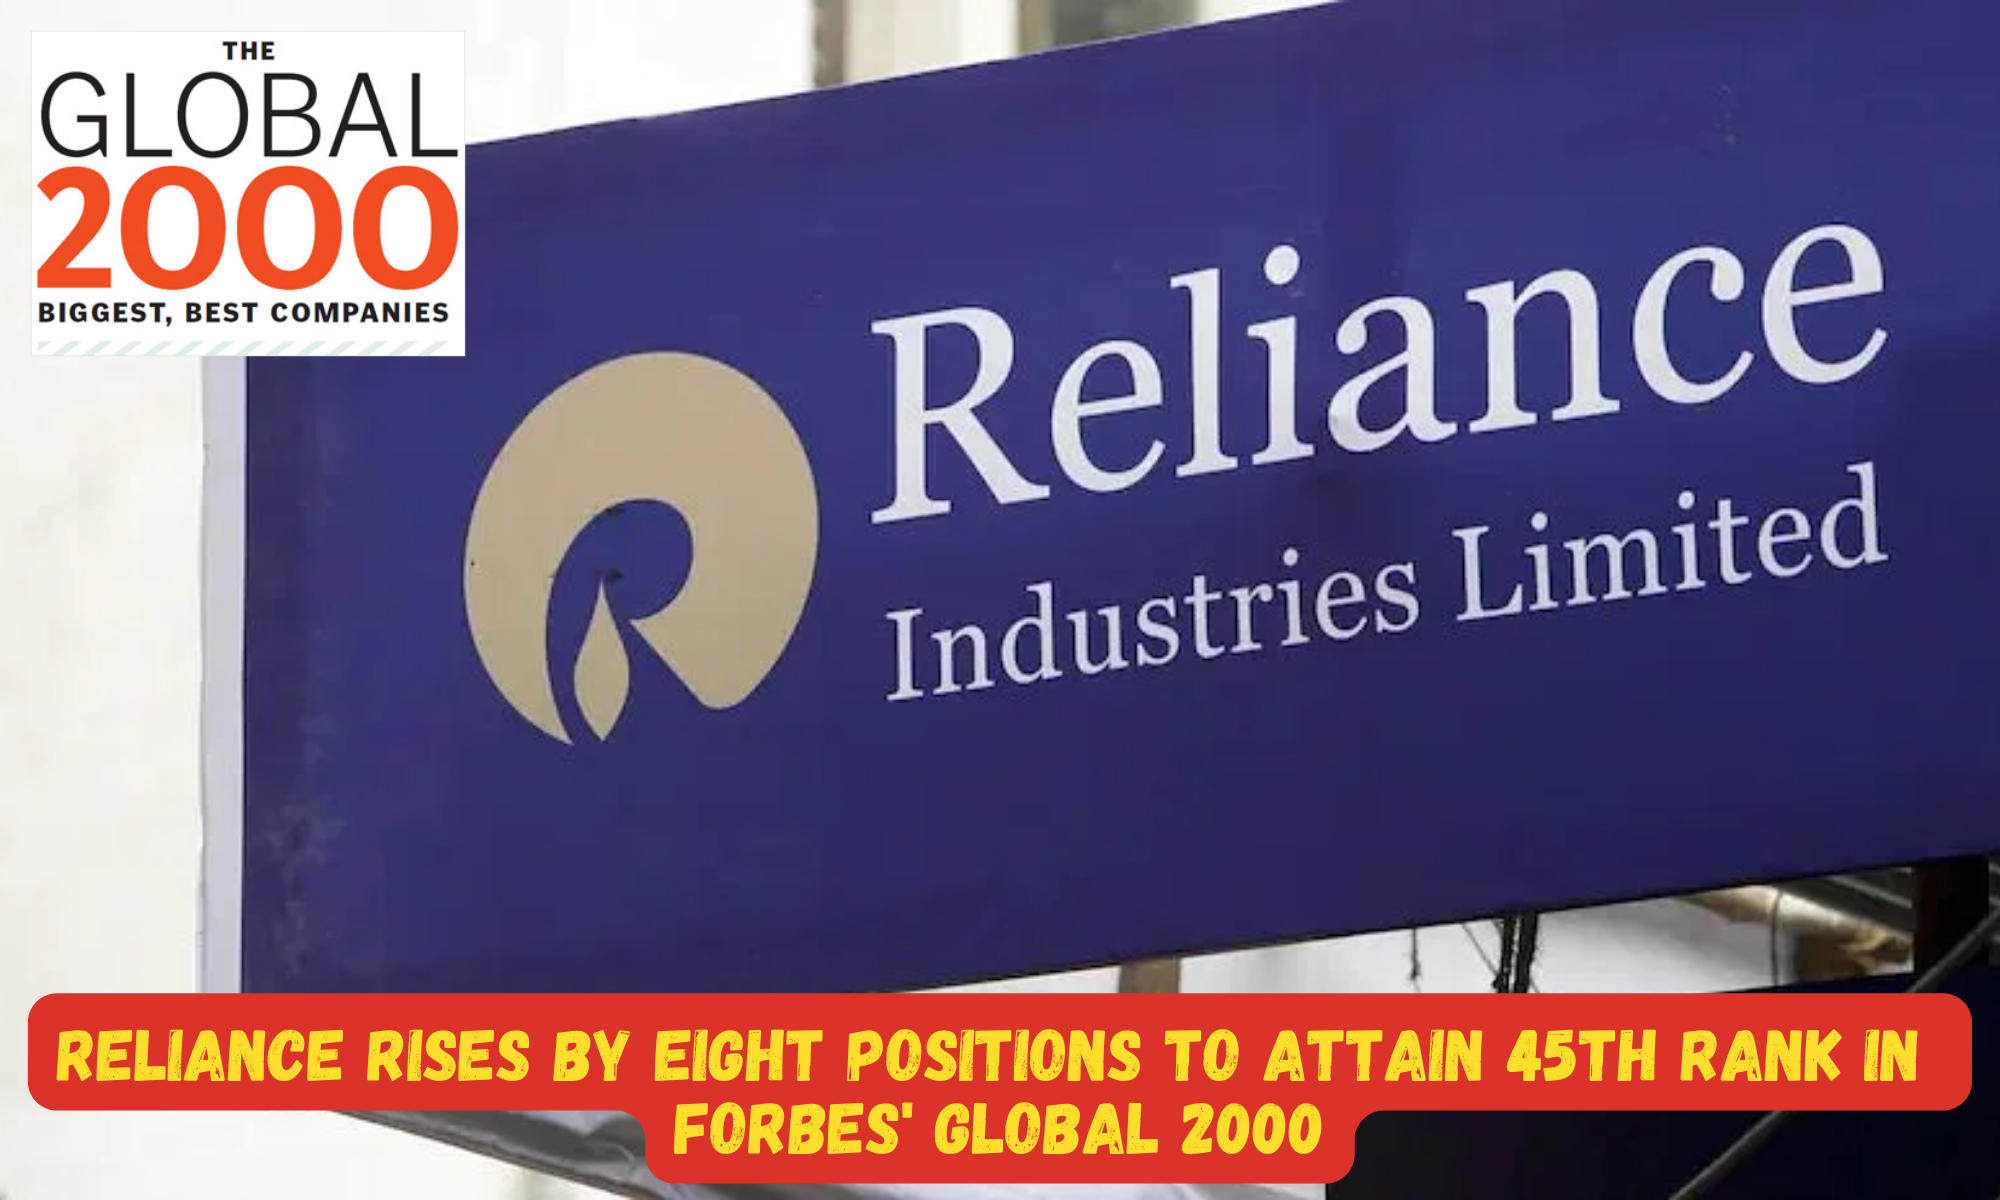 Reliance Rises by Eight Positions to Attain 45th Rank in Forbes' Global 2000